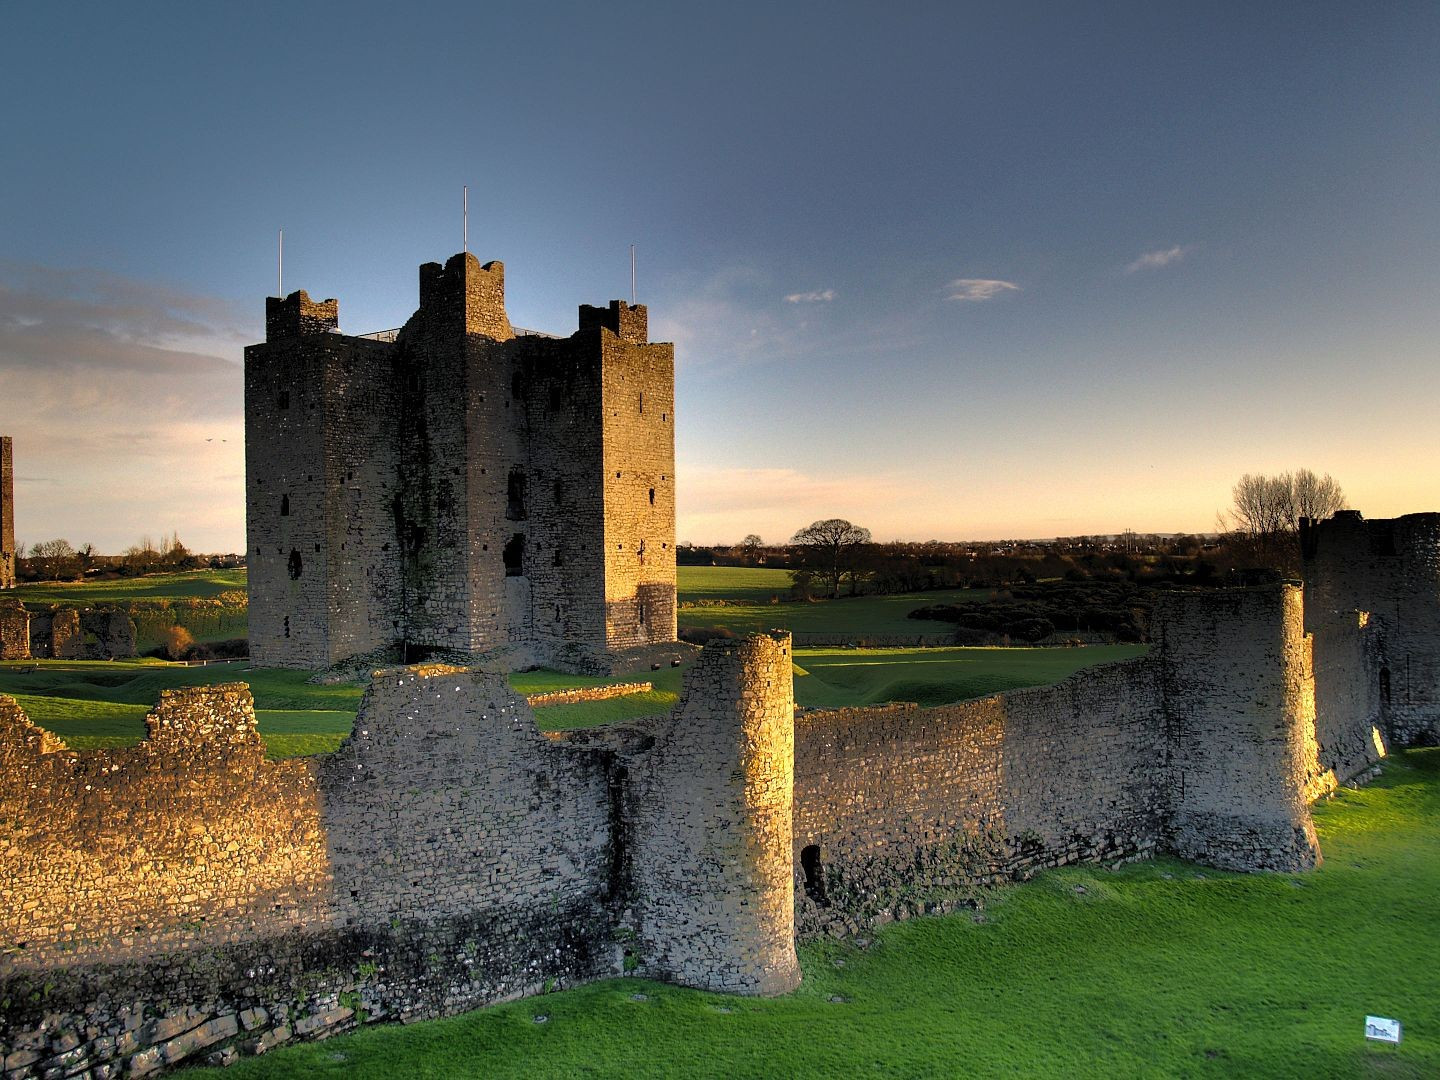 By Andrew Parnell - Trim Castle, CC BY 2.0, https://commons.wikimedia.org/w/index.php?curid=1589876